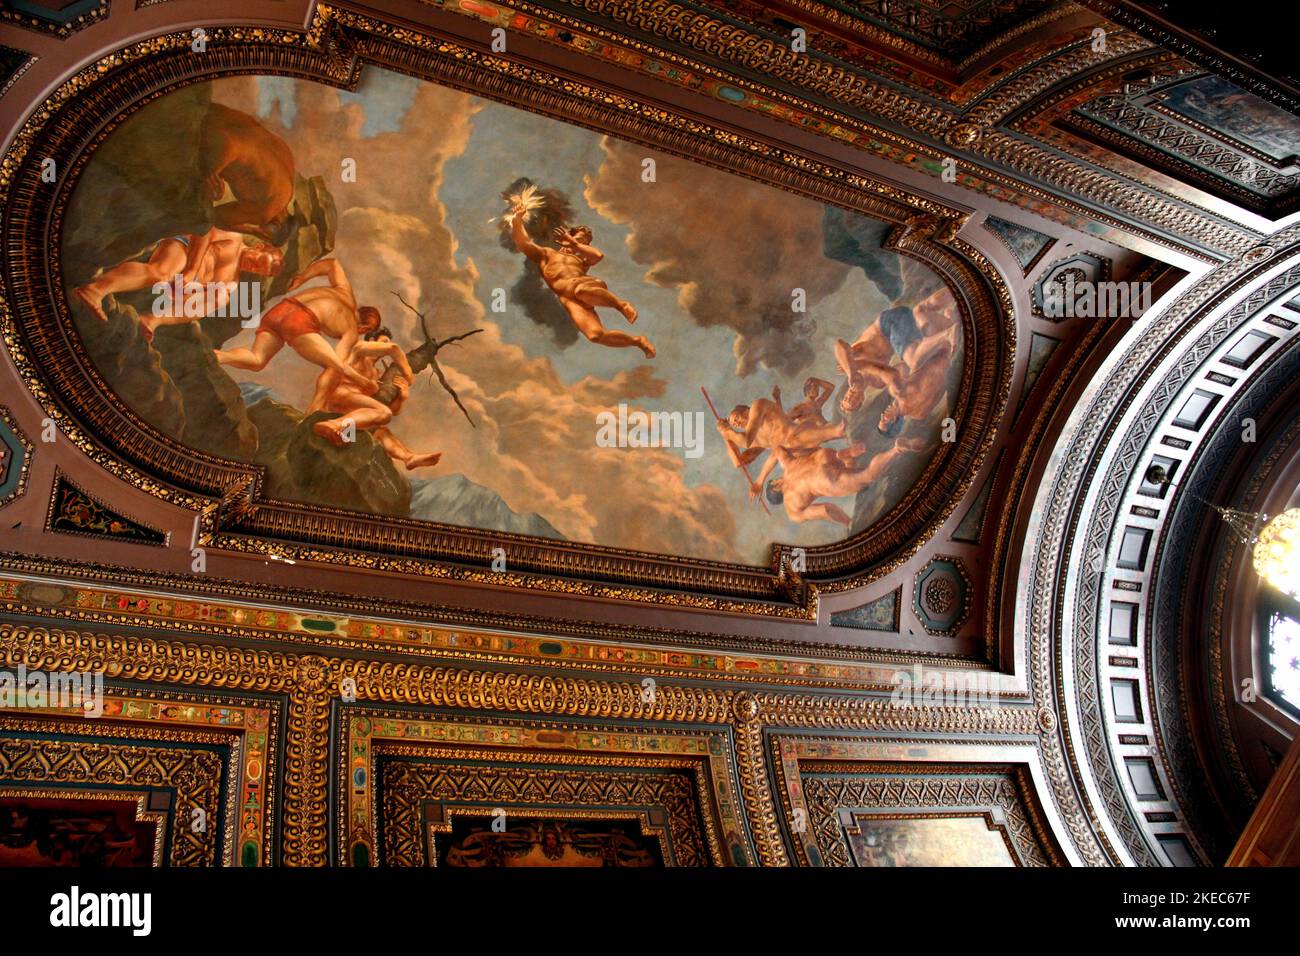 Allegorical painting and woodcarved decorations of the ceiling, interior of the New York Public Library - Stephen A. Schwarzman Building, New York, NY Stock Photo